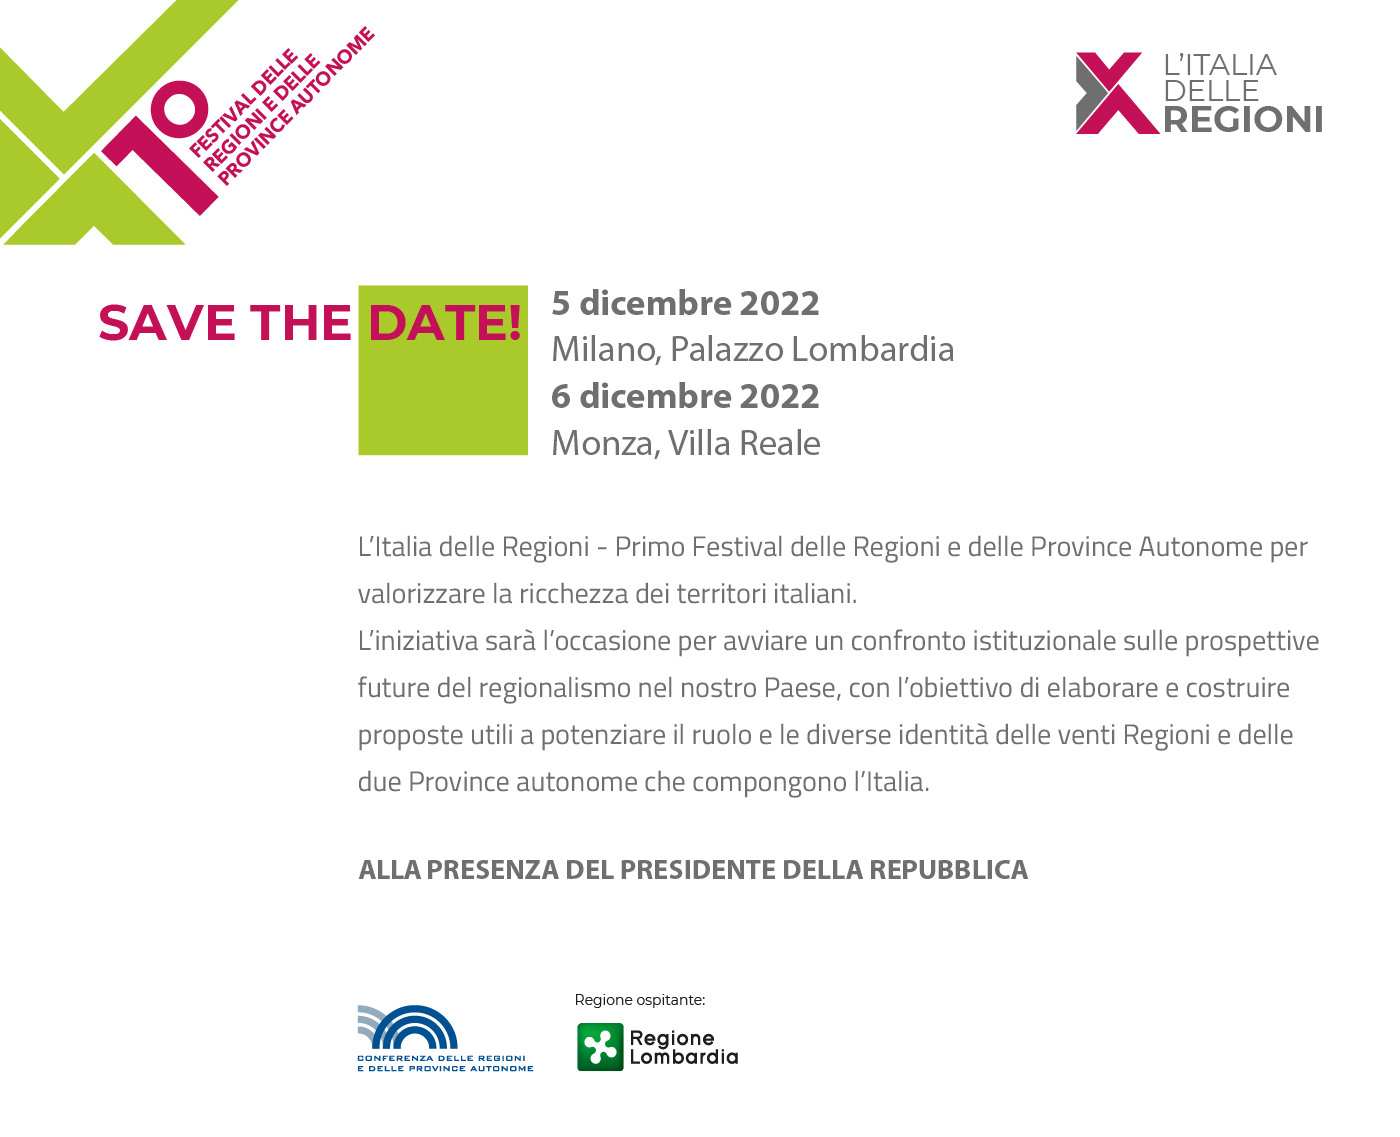 file/ELEMENTO_NEWSLETTER/24930/Save-the-date_UFFICIALE_festival_regioni_5_6_12_22_NL.png